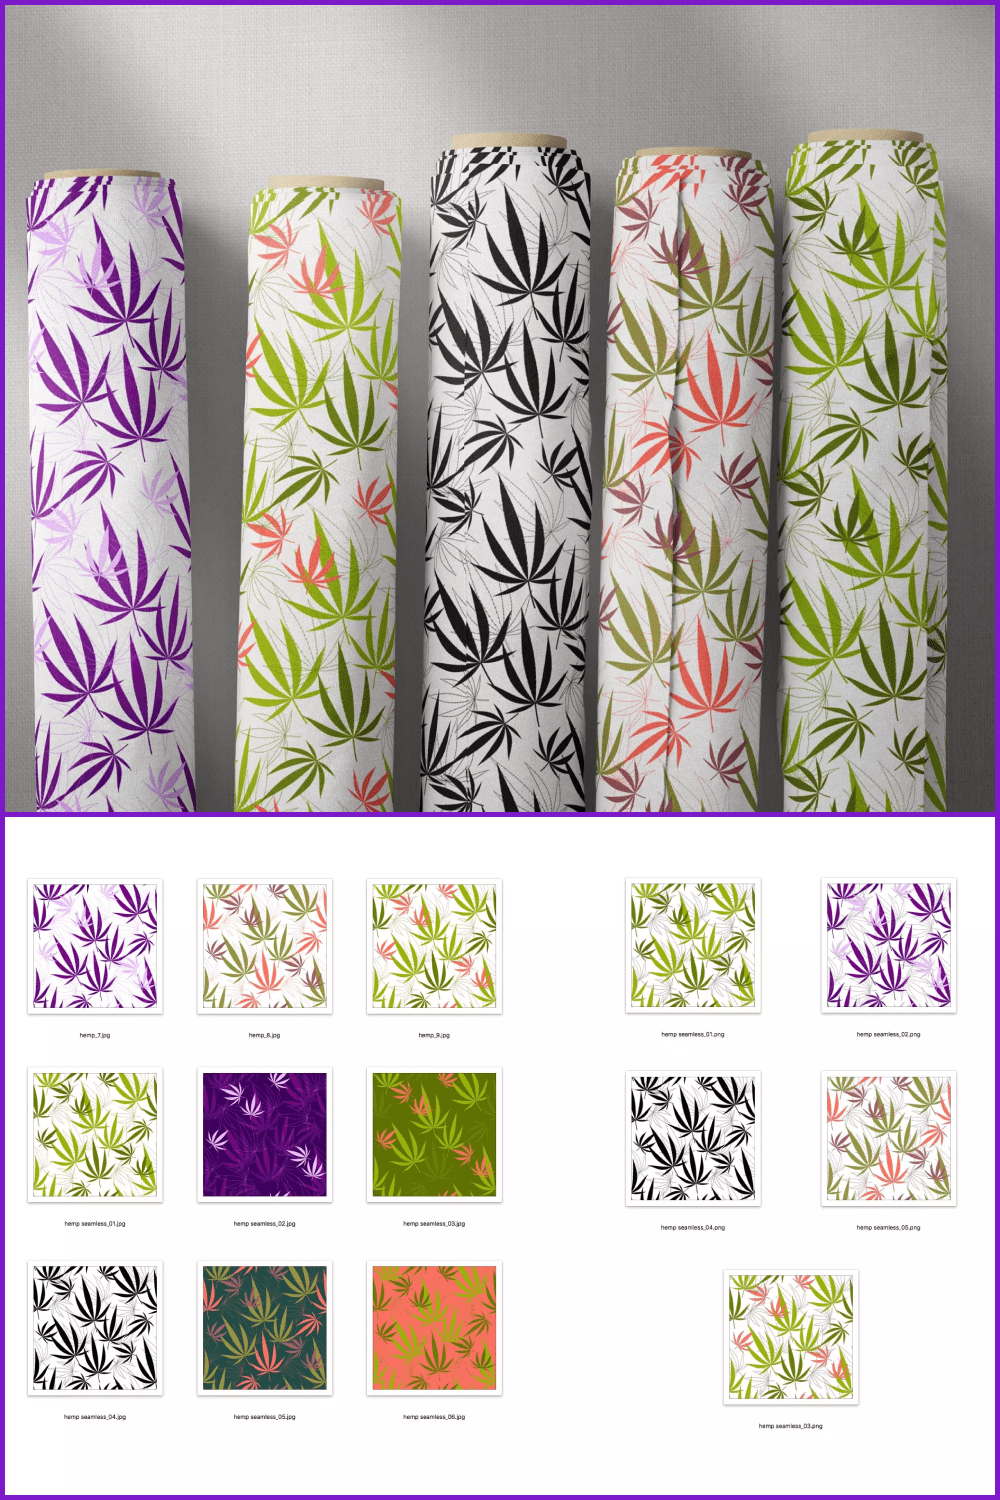 Floral wallpaper rolls and variants of patterns.